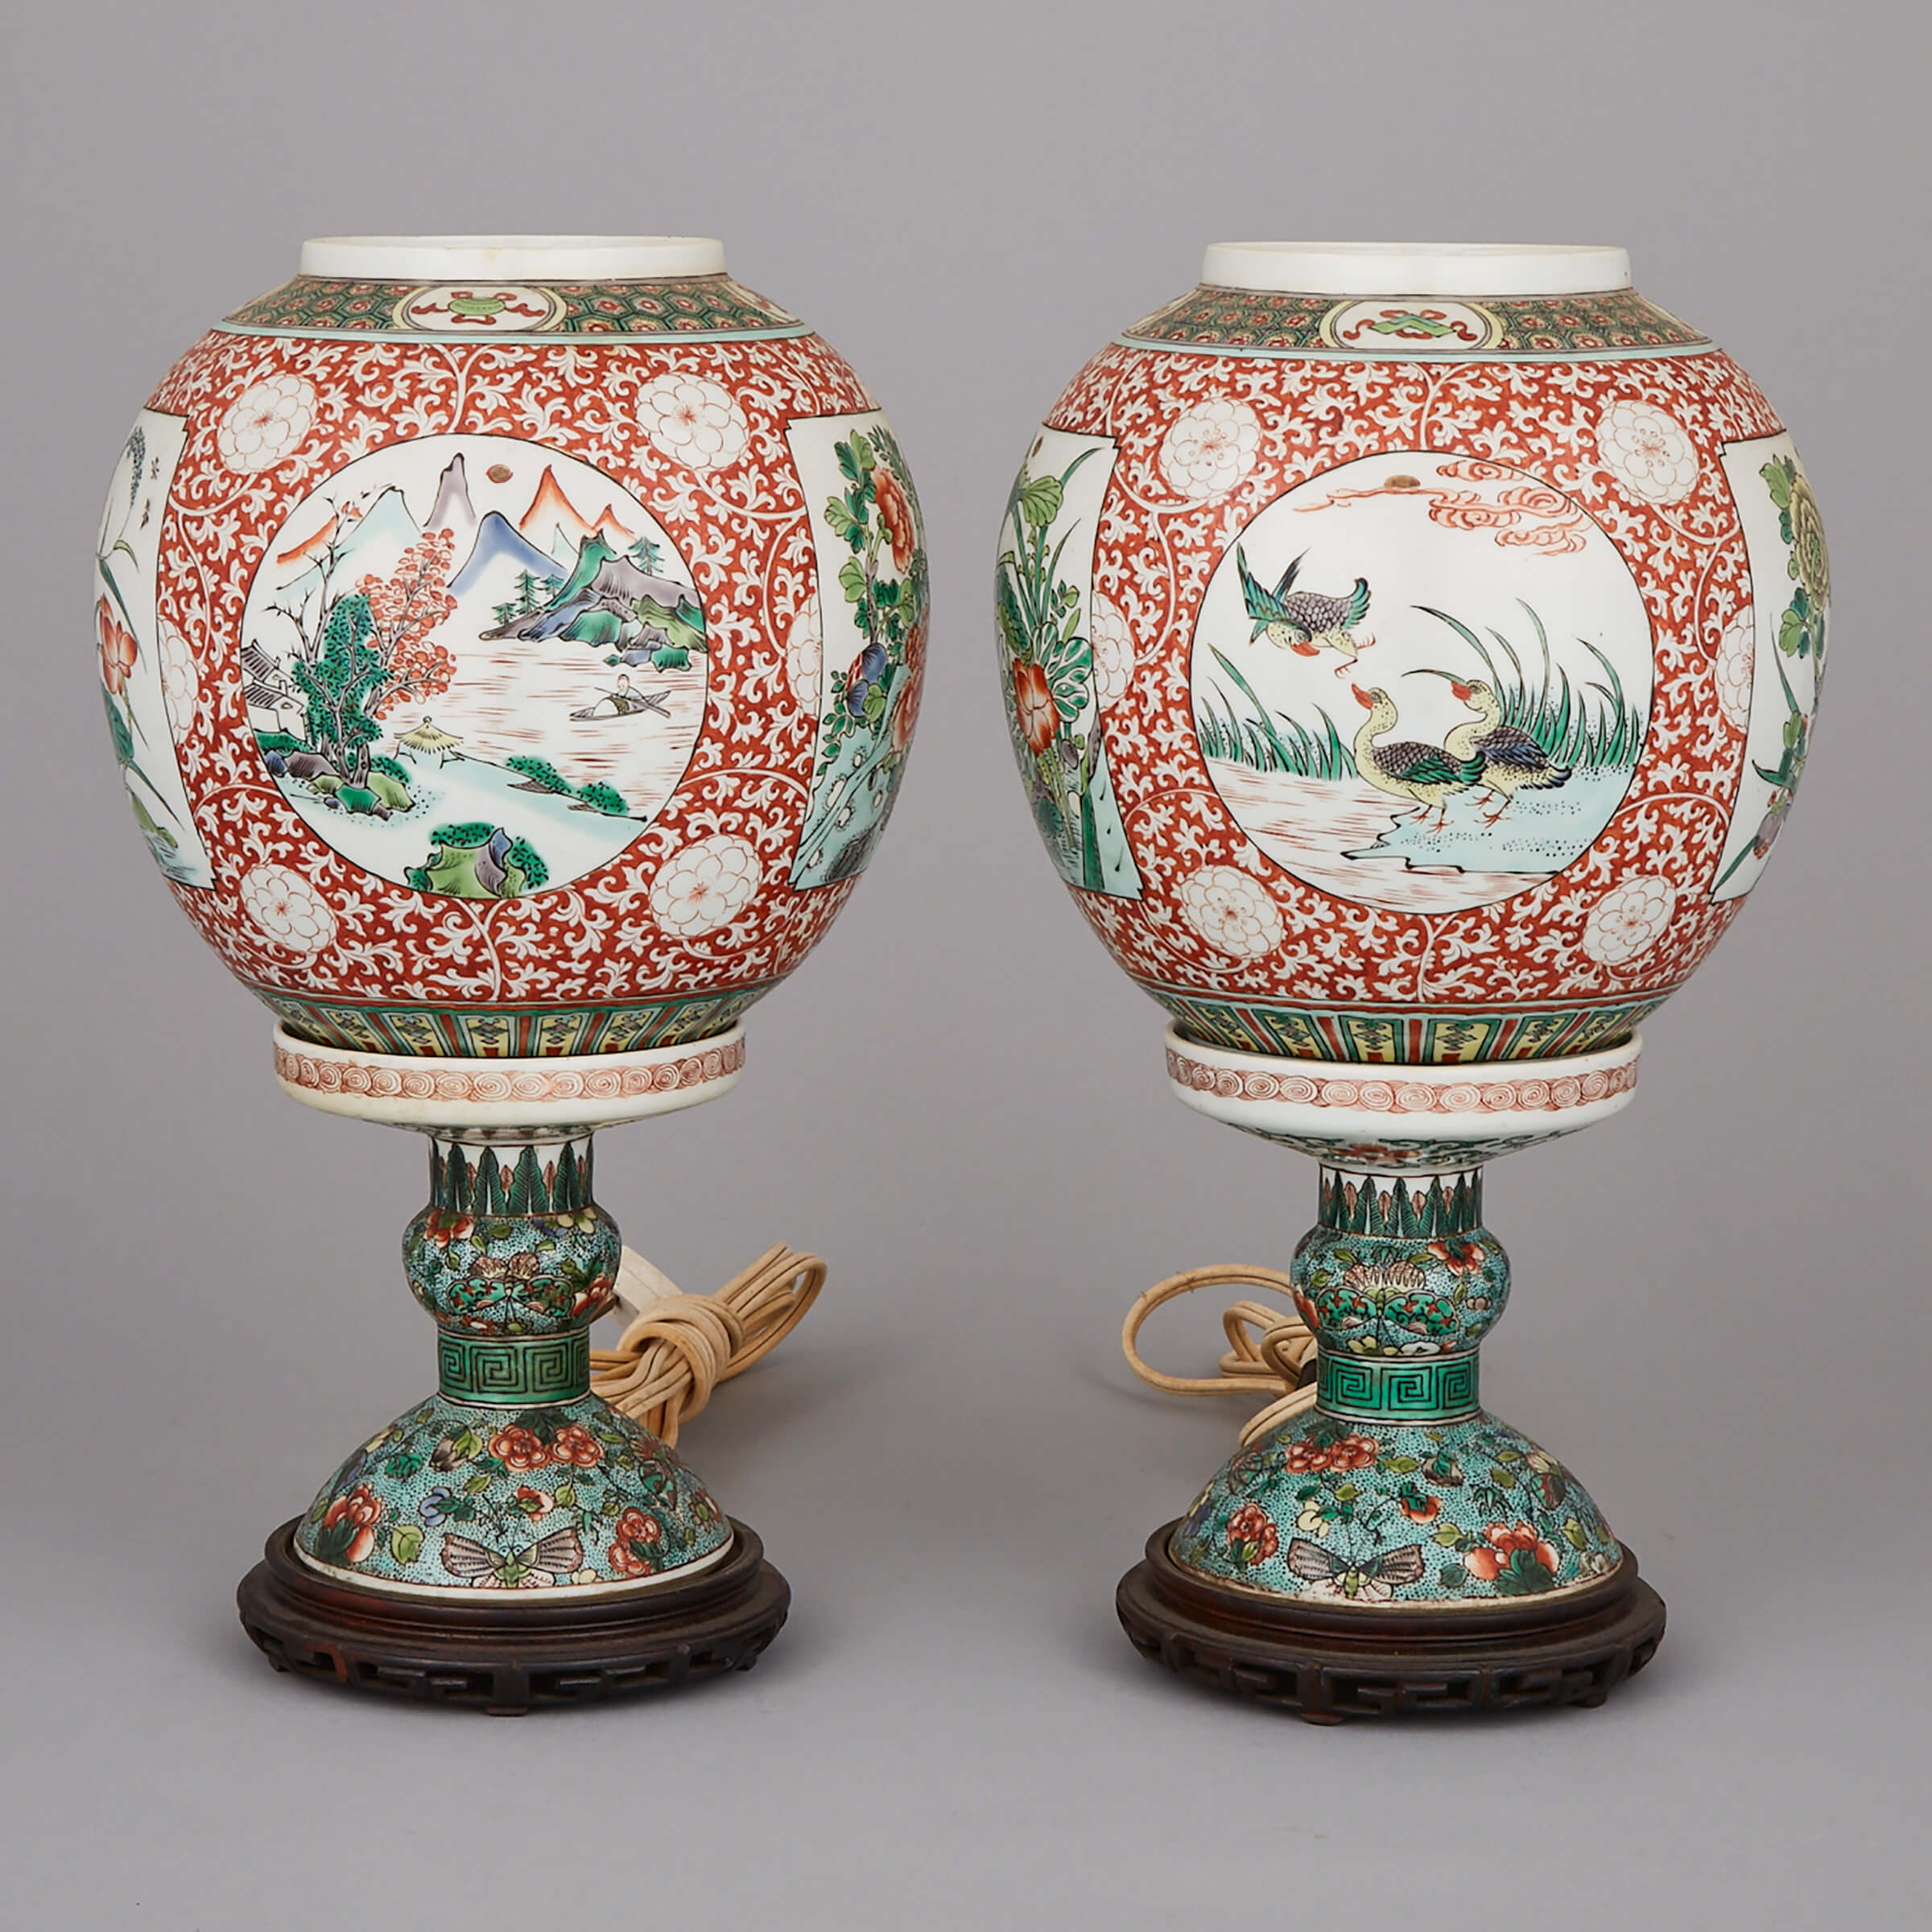 A Pair of Chinese Eggshell Porcelain Lamps